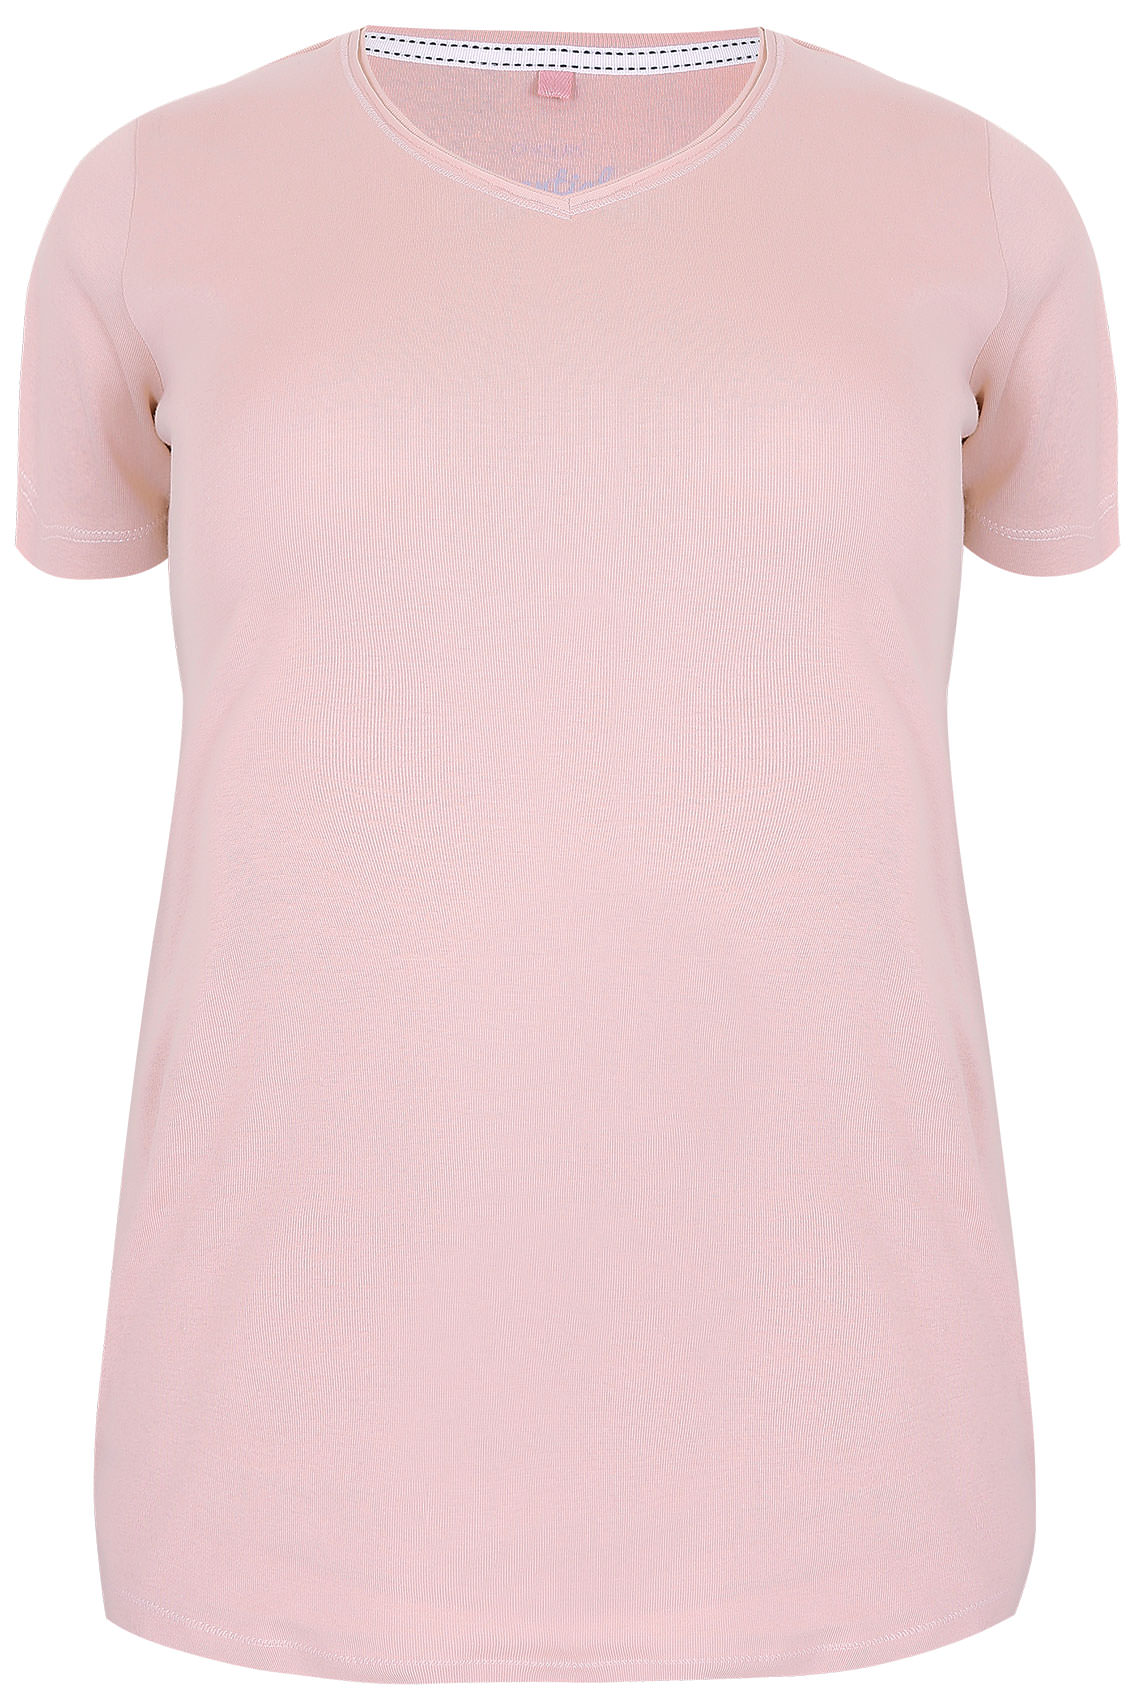 Y0urs Yours Blush Pink Pure Cotton Ribbed V Neck T Shirt Plus